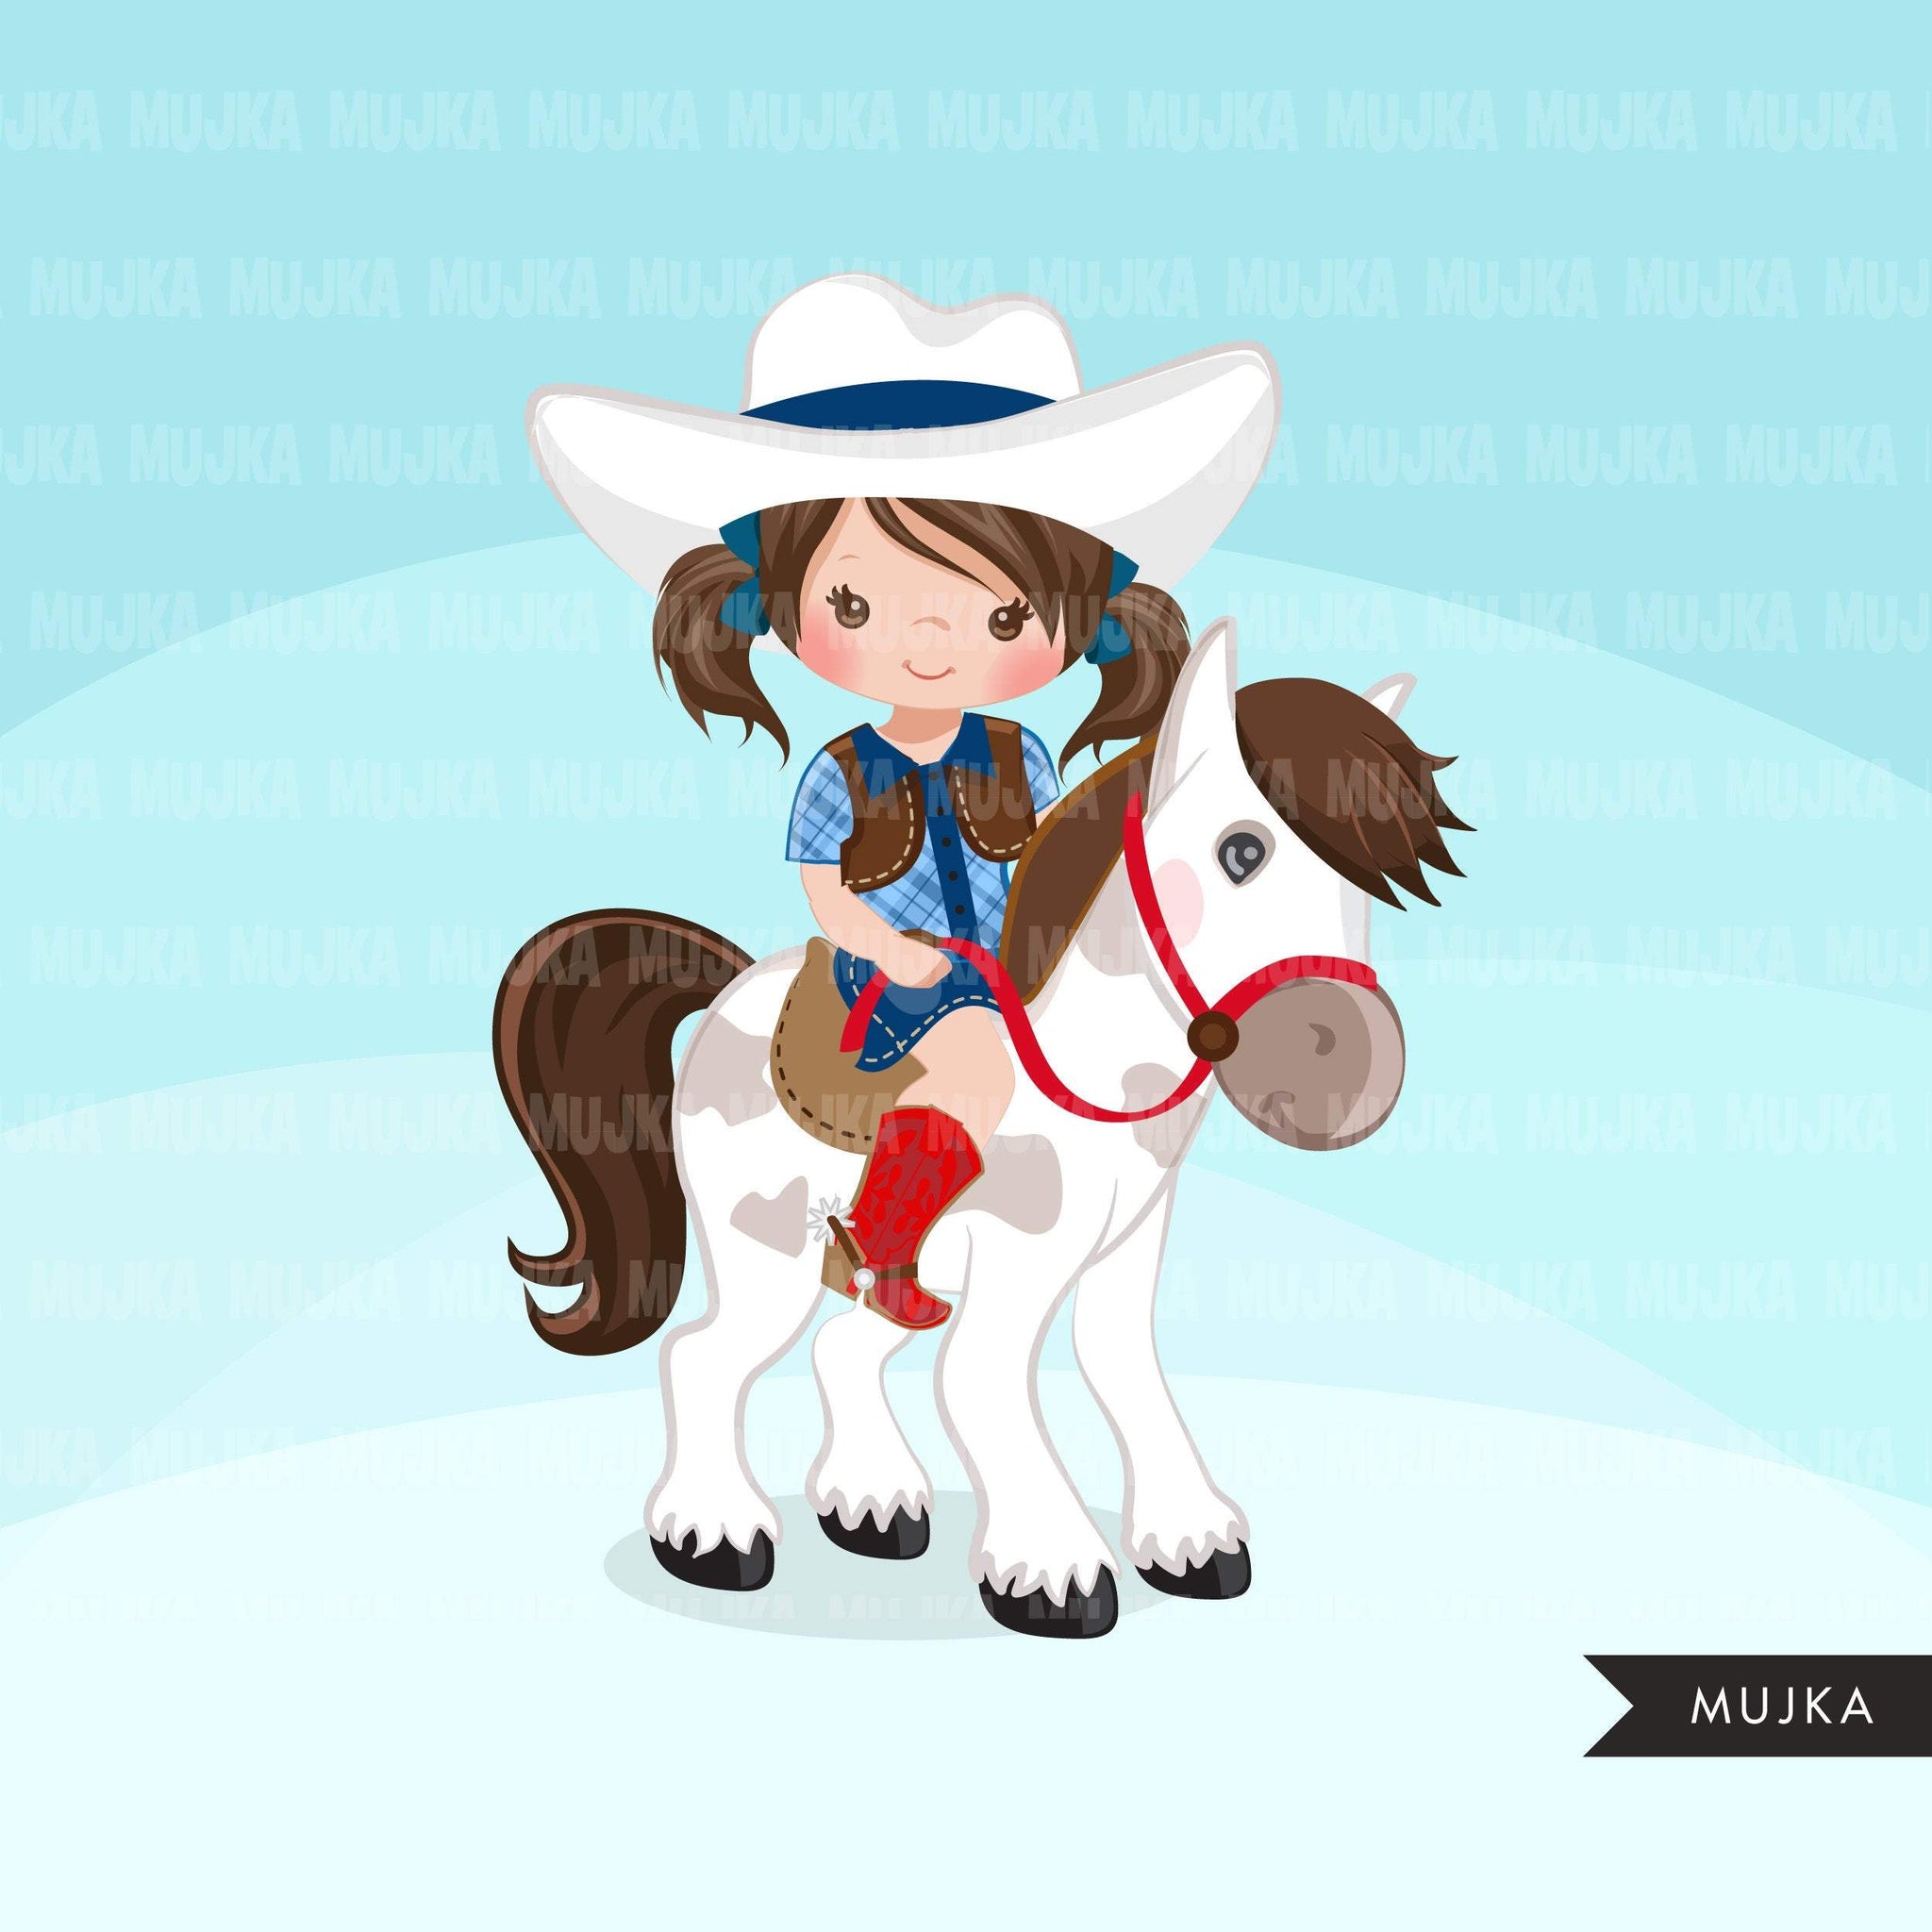 Cowgirl with horse clipart, farmer characters country farm graphics, western wild west girl clip art